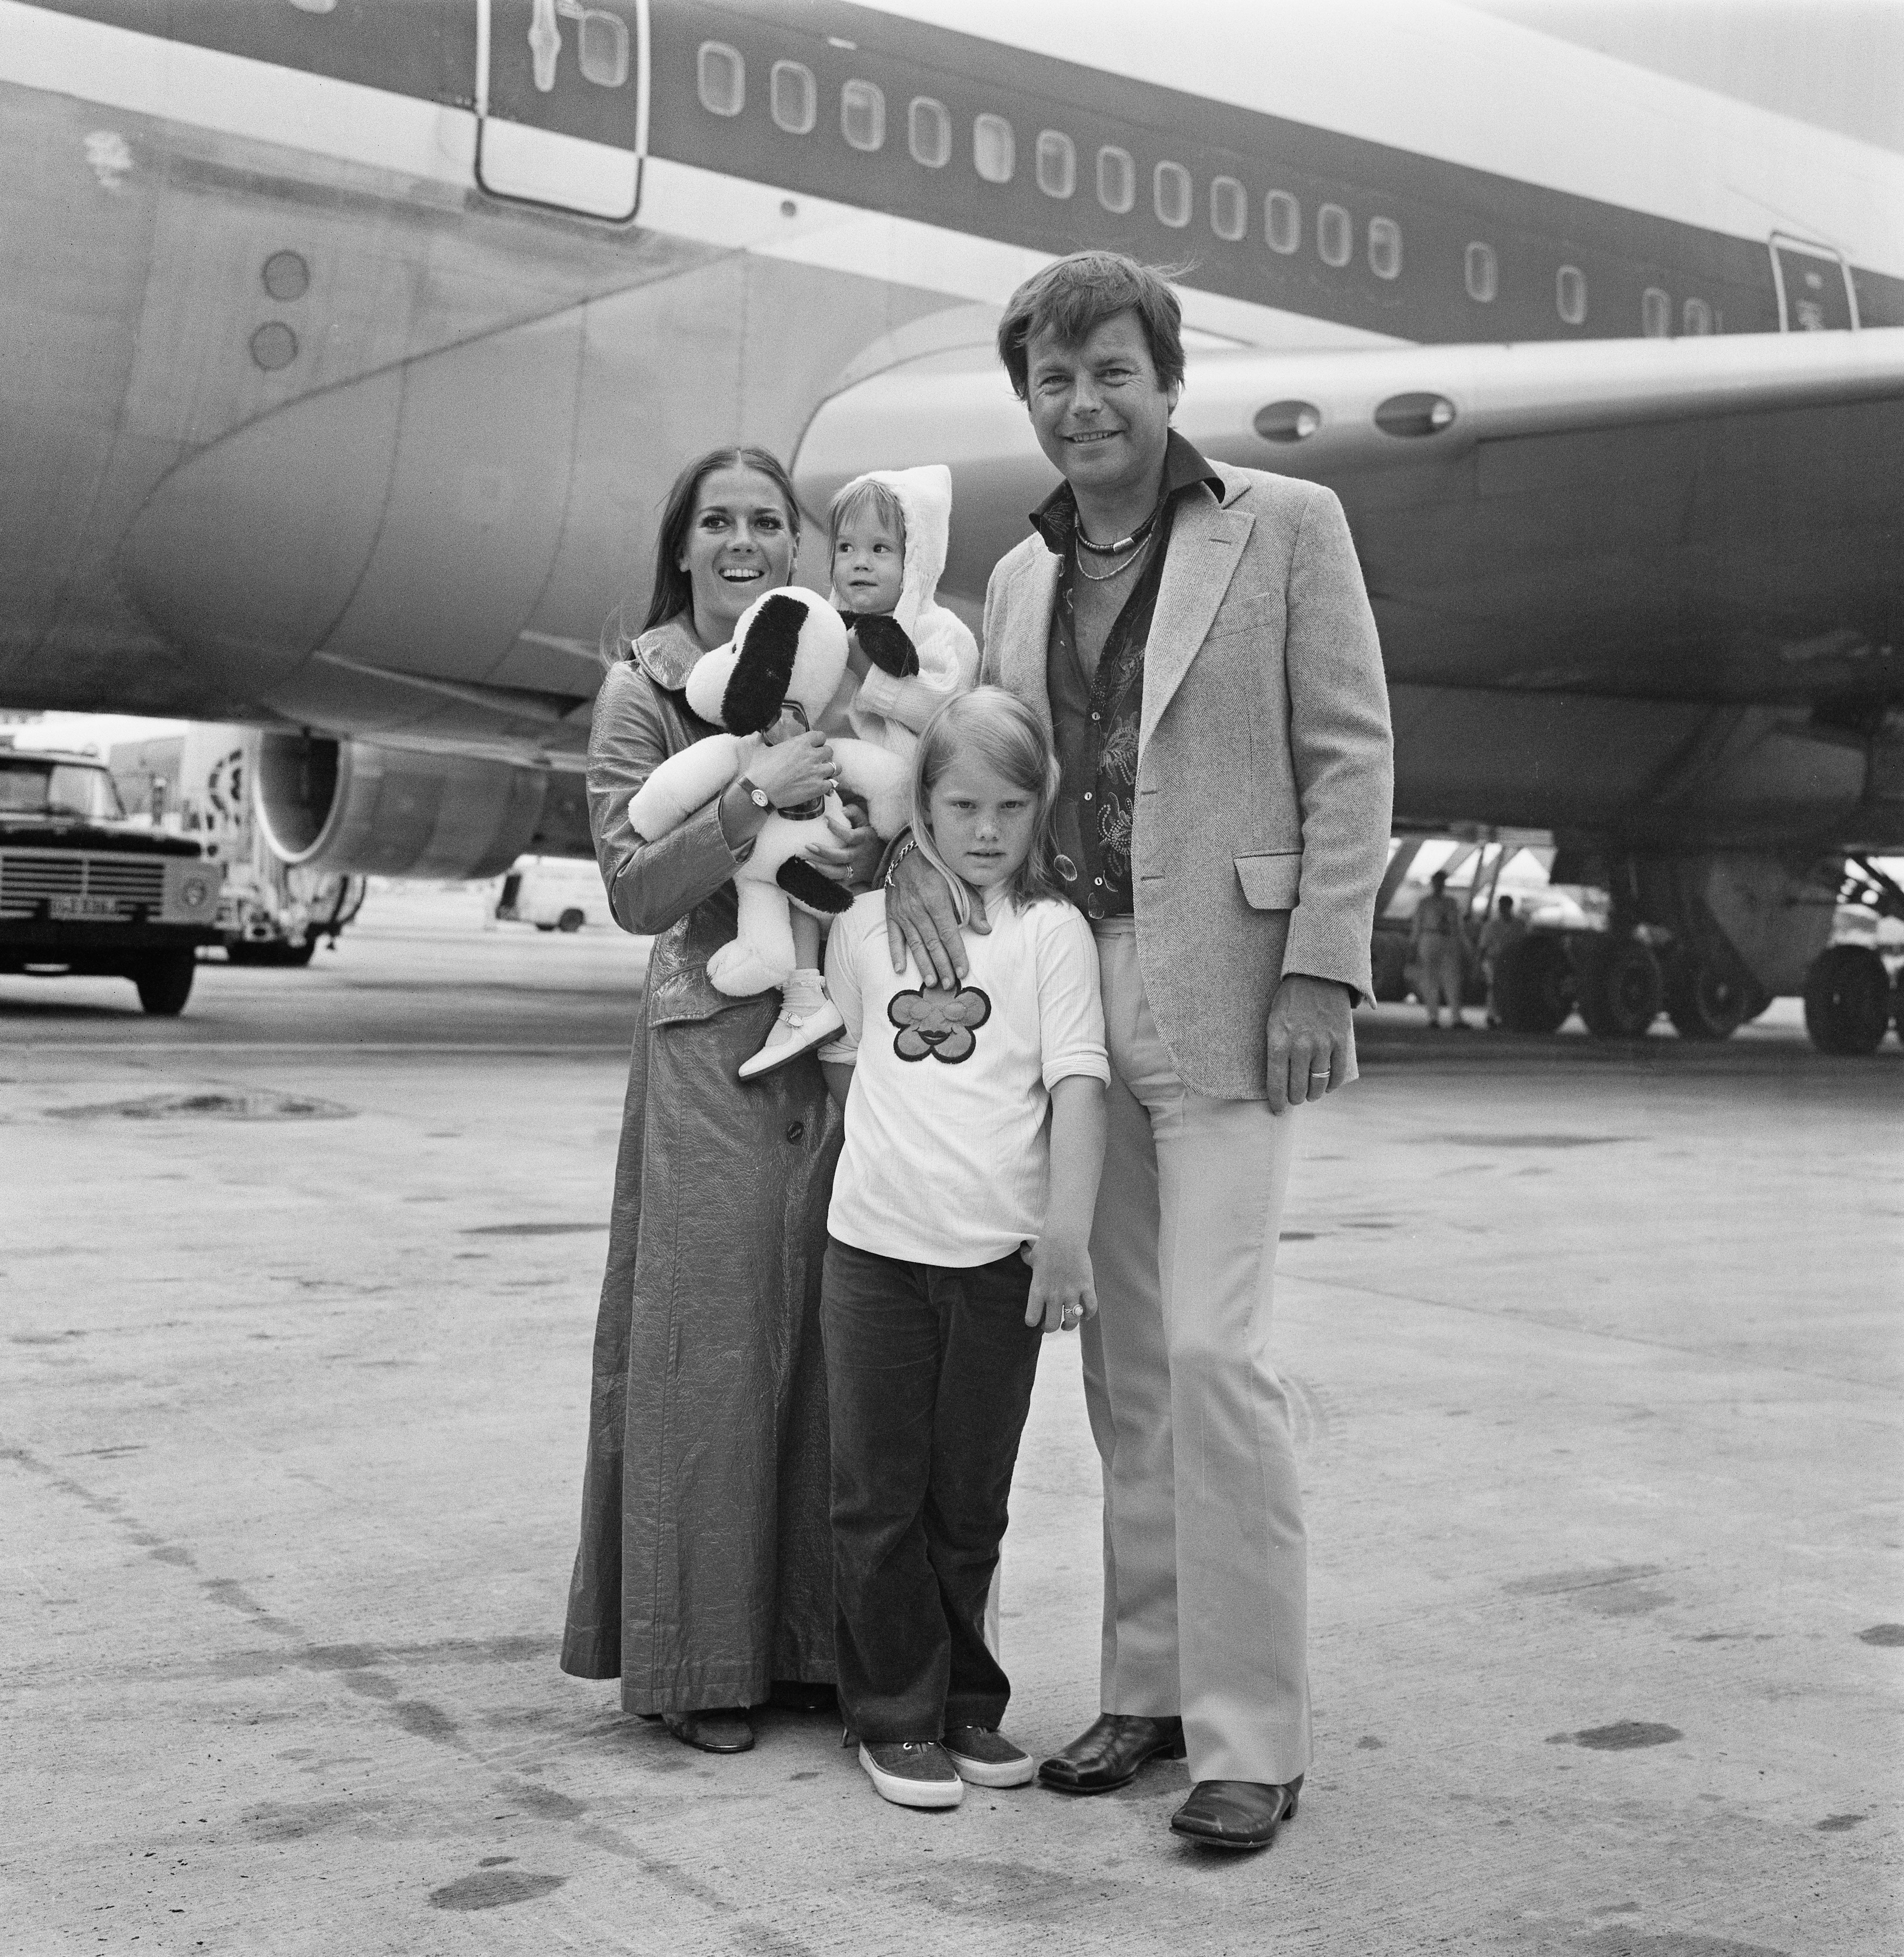 Natalie Wood, Robert Wagner, their daughter Natasha (later actor Natasha Gregson Wagner), and his daughter Katie Wagner at Heathrow Airport in London on 4 August 1972